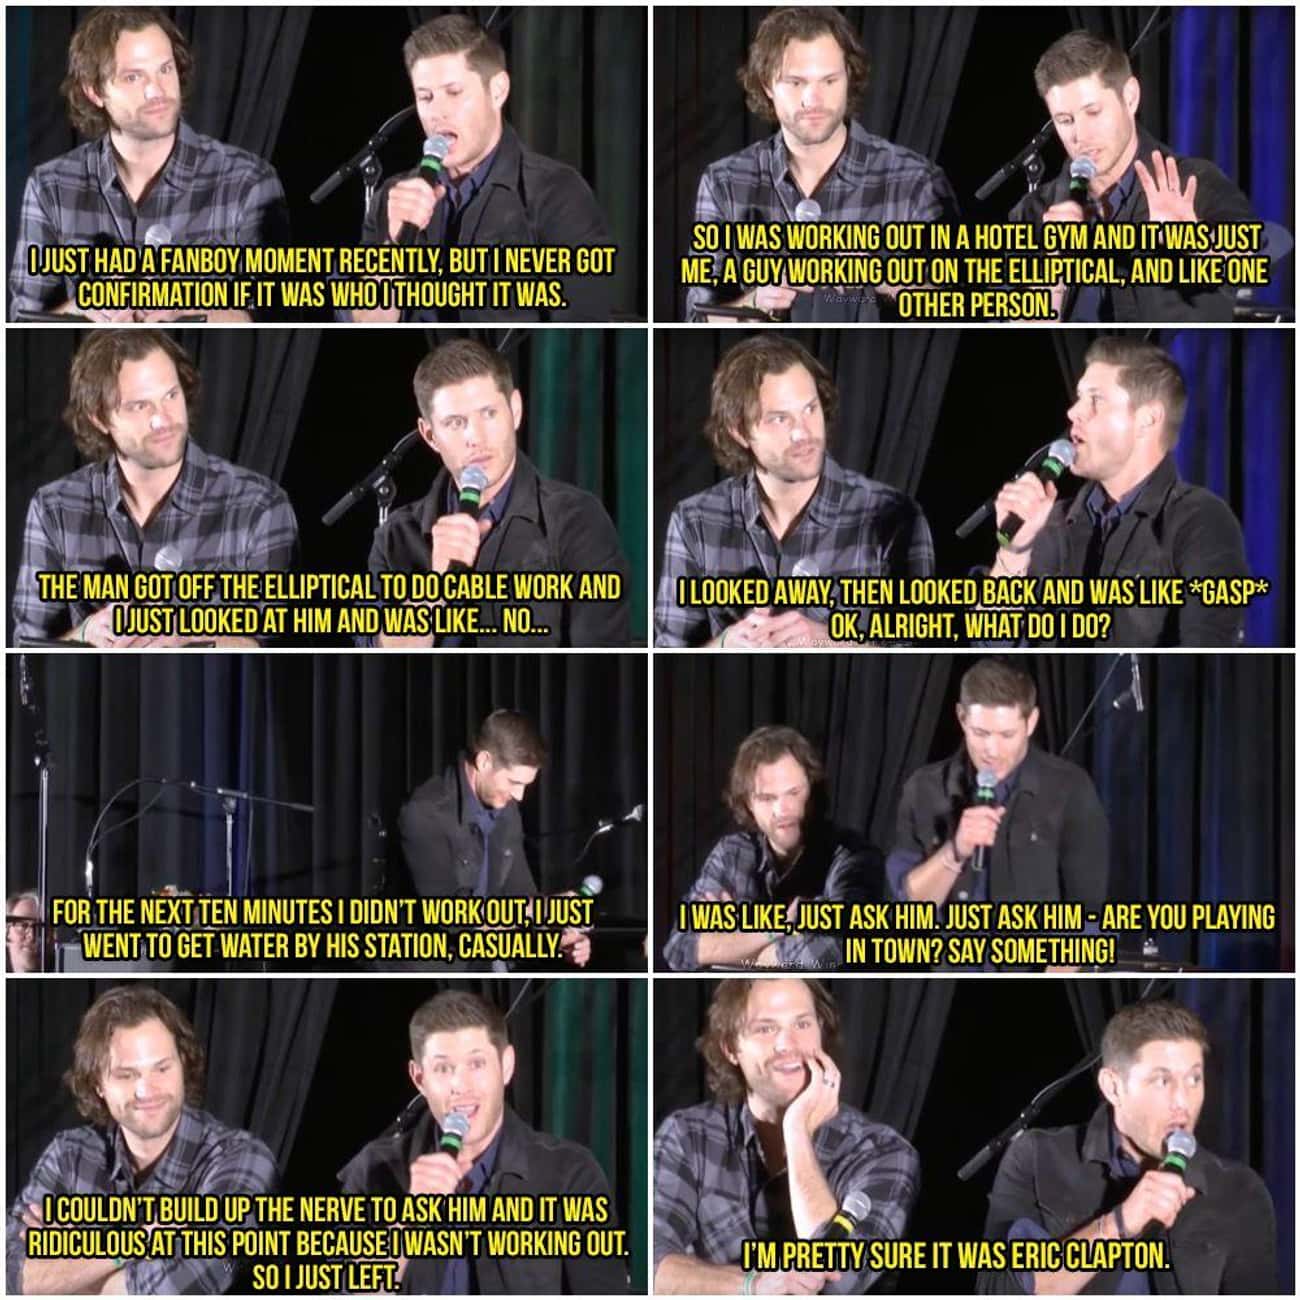 Jensen Ackles Couldn't Find The Courage To Approach Eric Clapton At The Gym